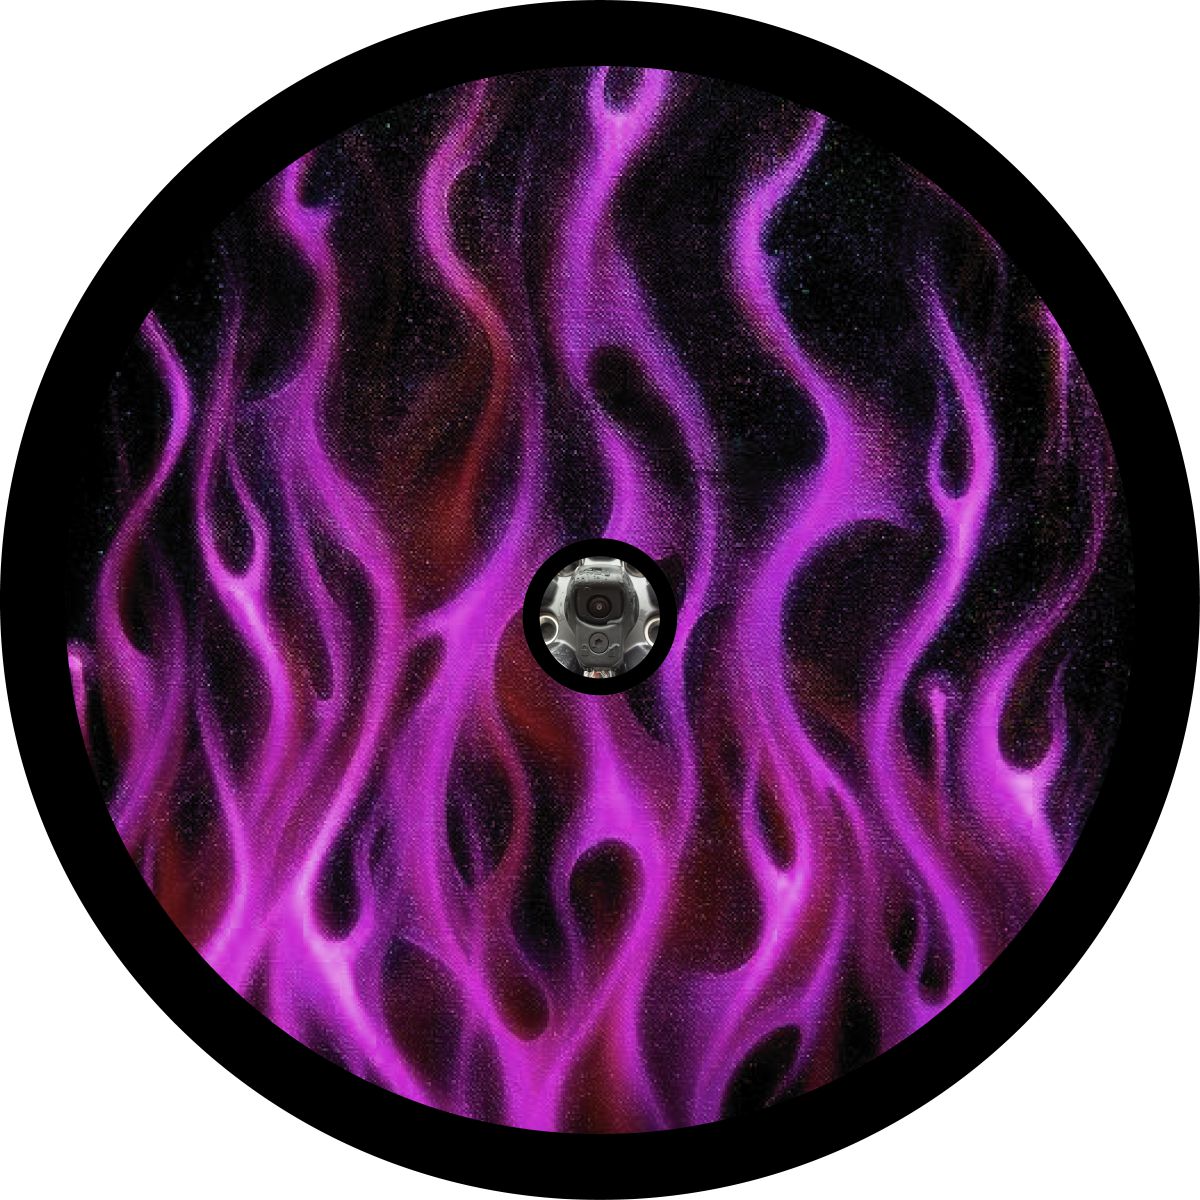 Flames in Purple or Xtreme Purple Spare Tire Cover for Jeep Wrangler, Bronco, RV, Camper, Trailer, and more with a back up camera design.